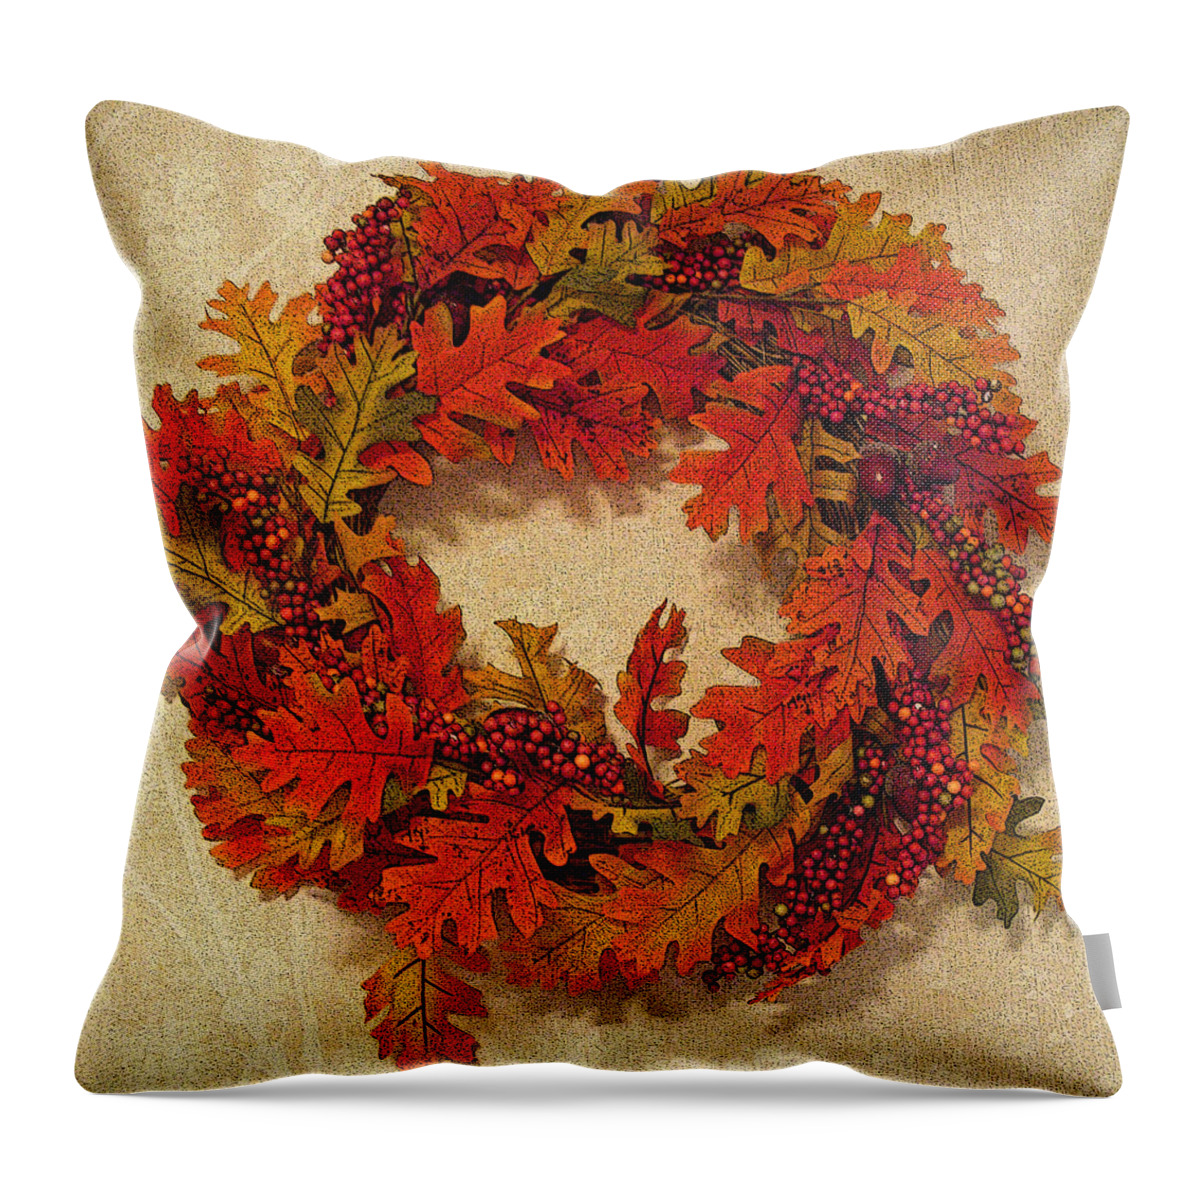 Autumn Throw Pillow featuring the photograph Autumn Wreath by Aimee L Maher ALM GALLERY